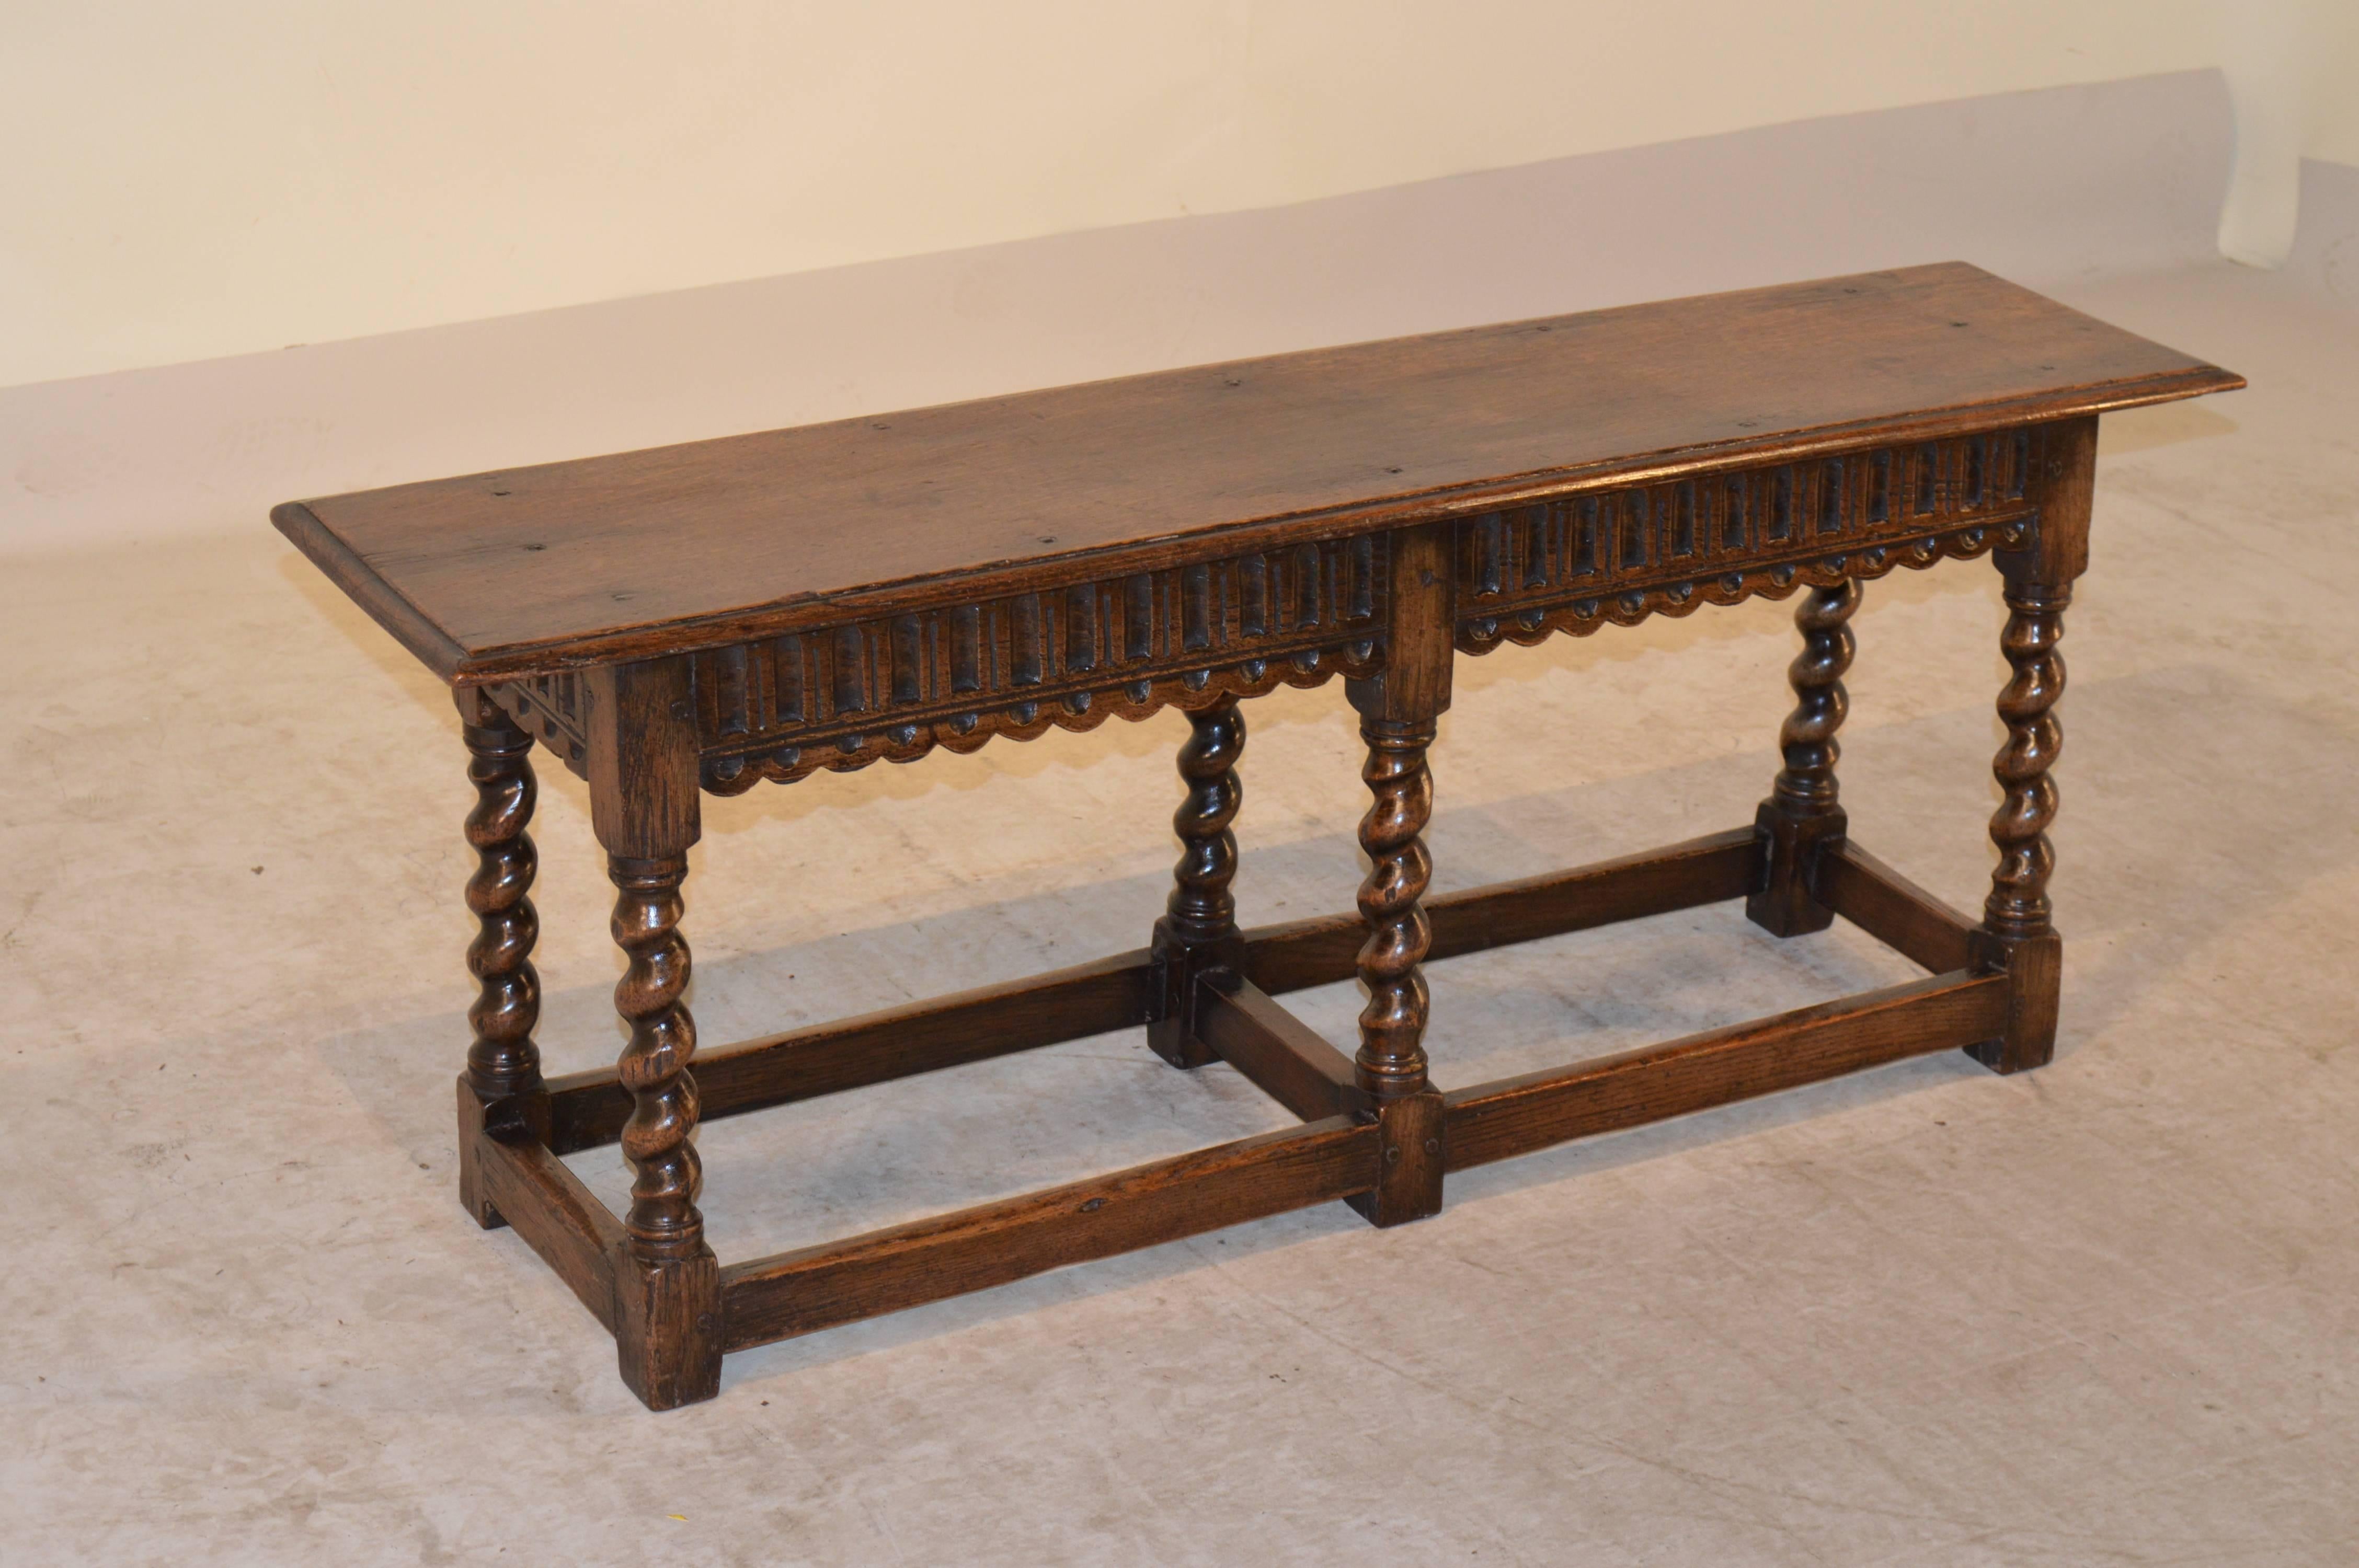 19th Century English oak joint bench with pegged construction.  The top has a beveled edge, following down to a hand carved apron with a scalloped bottom edge and is supported on hand turned barley twist legs, joined by stretchers.